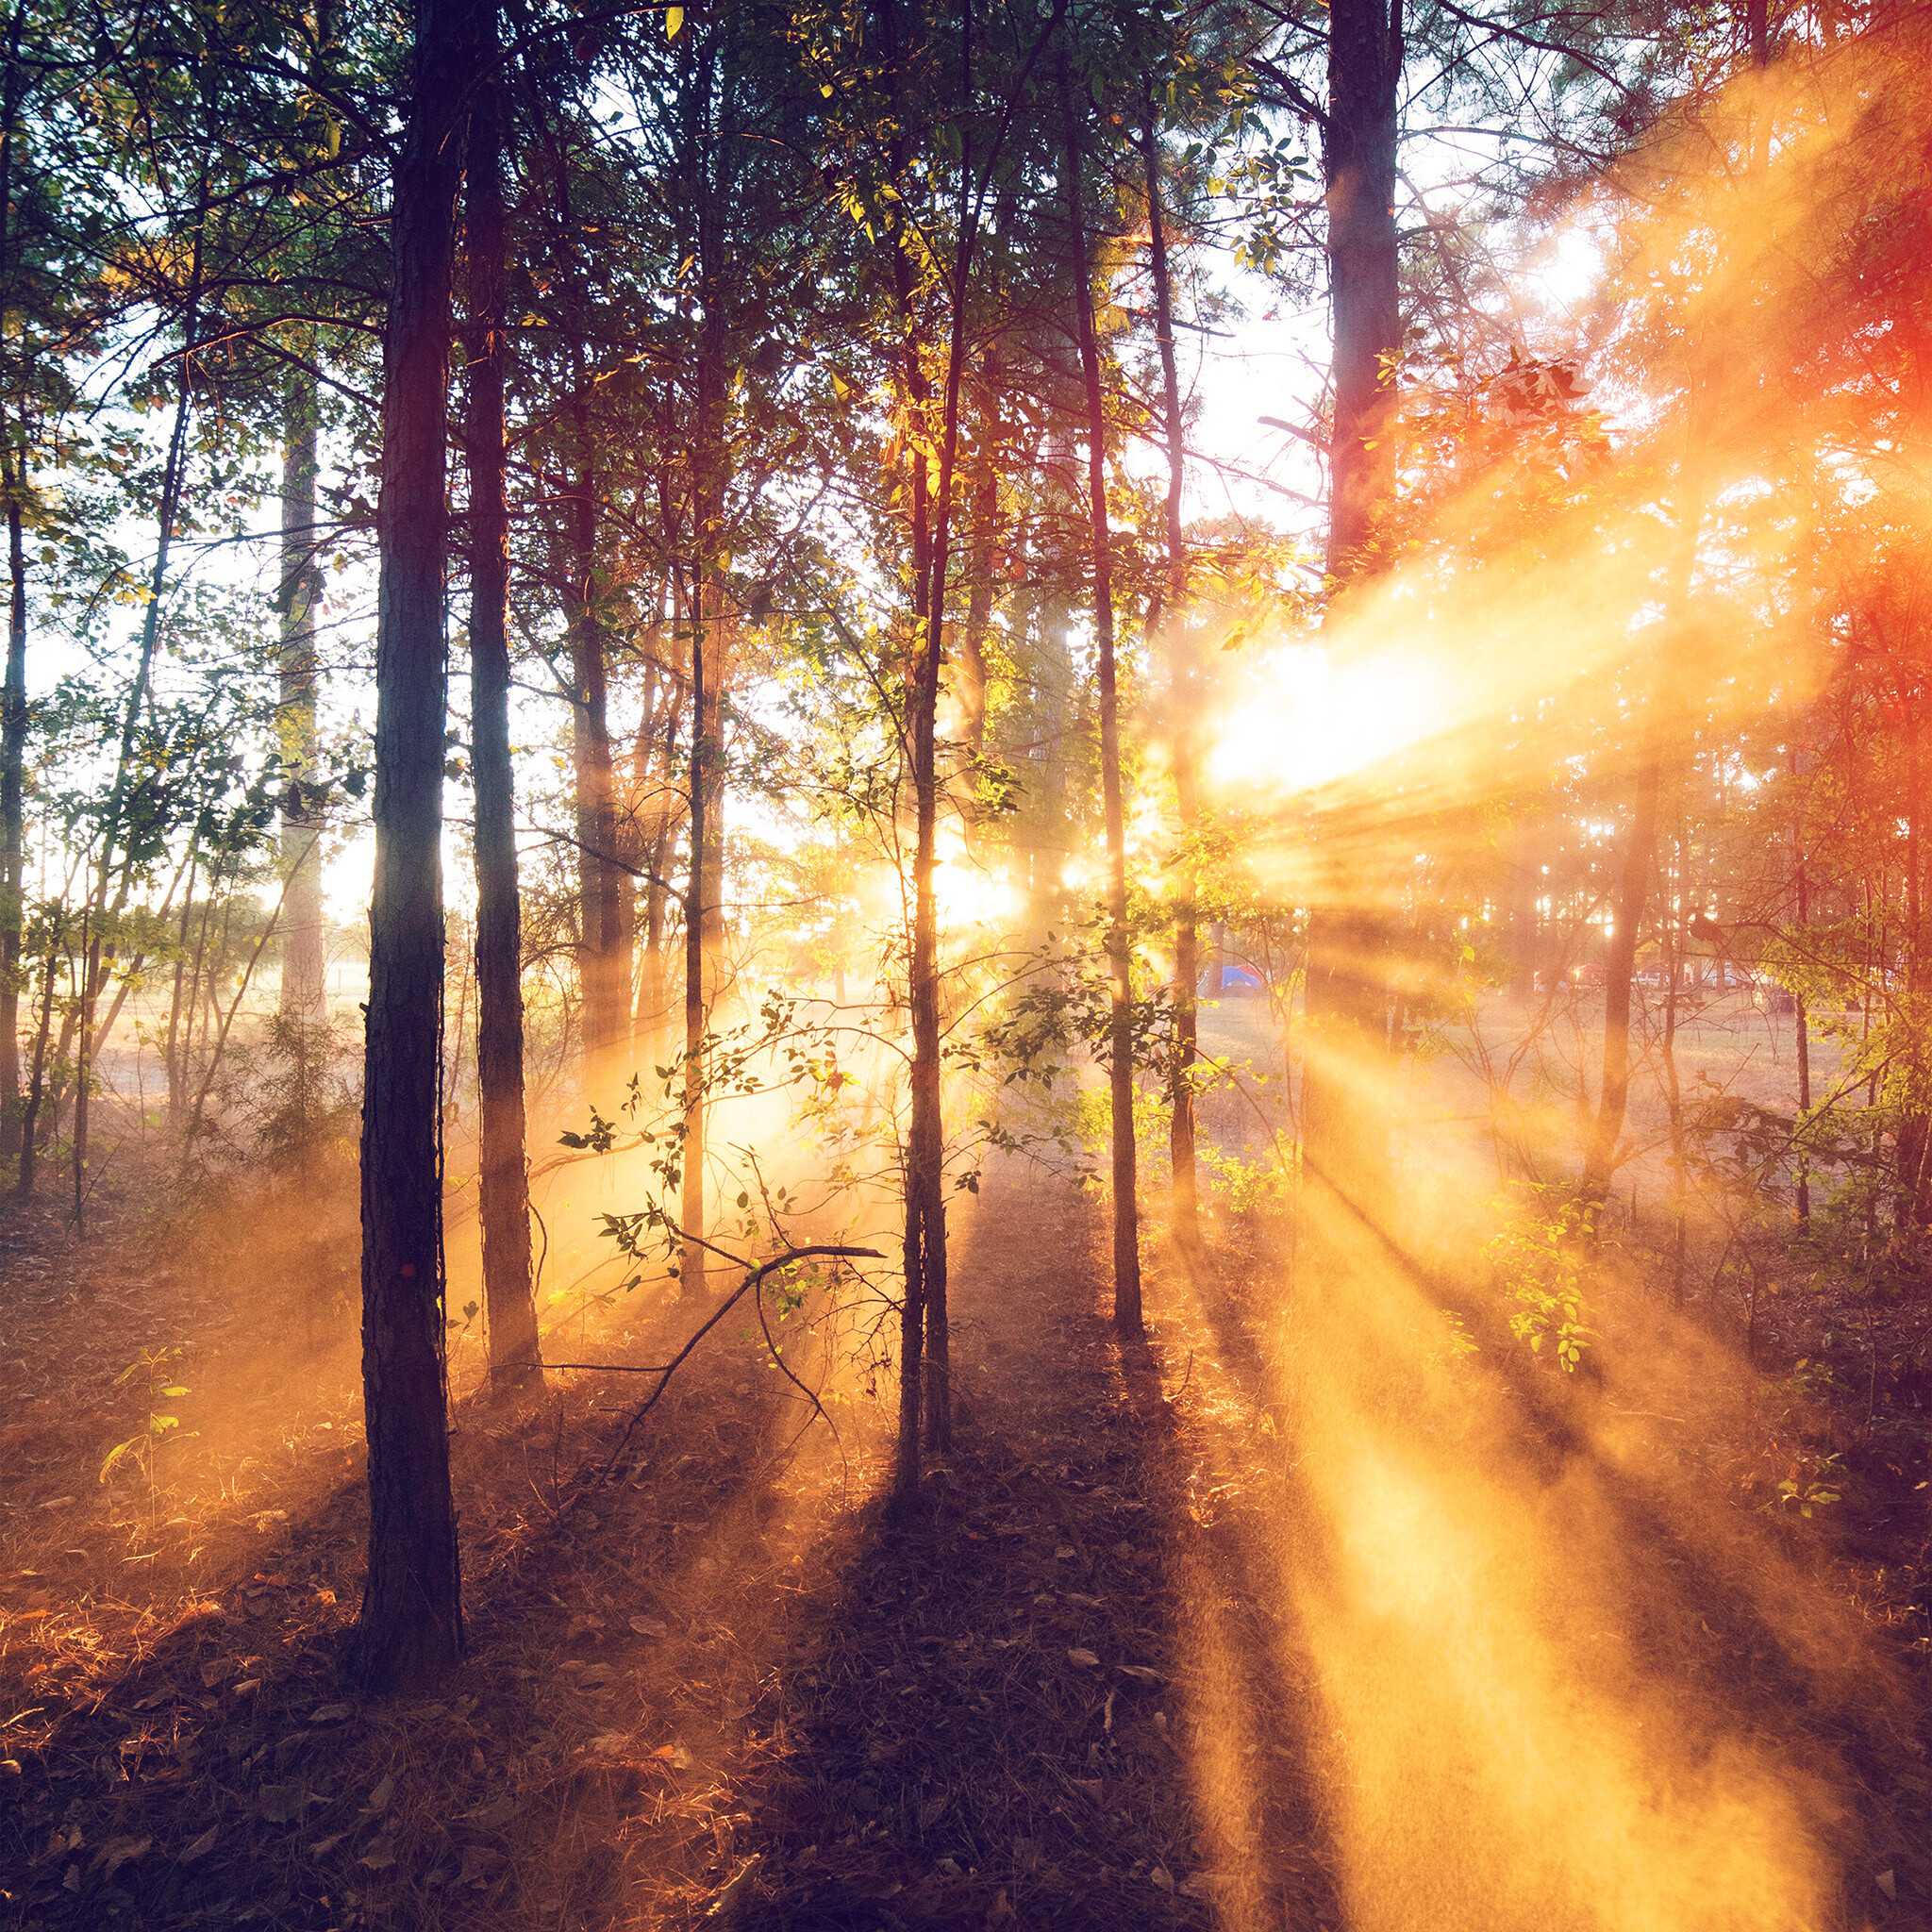 Sunrise: Dawn, The sun breaking through the forest, Atmospheric effects. 2050x2050 HD Wallpaper.